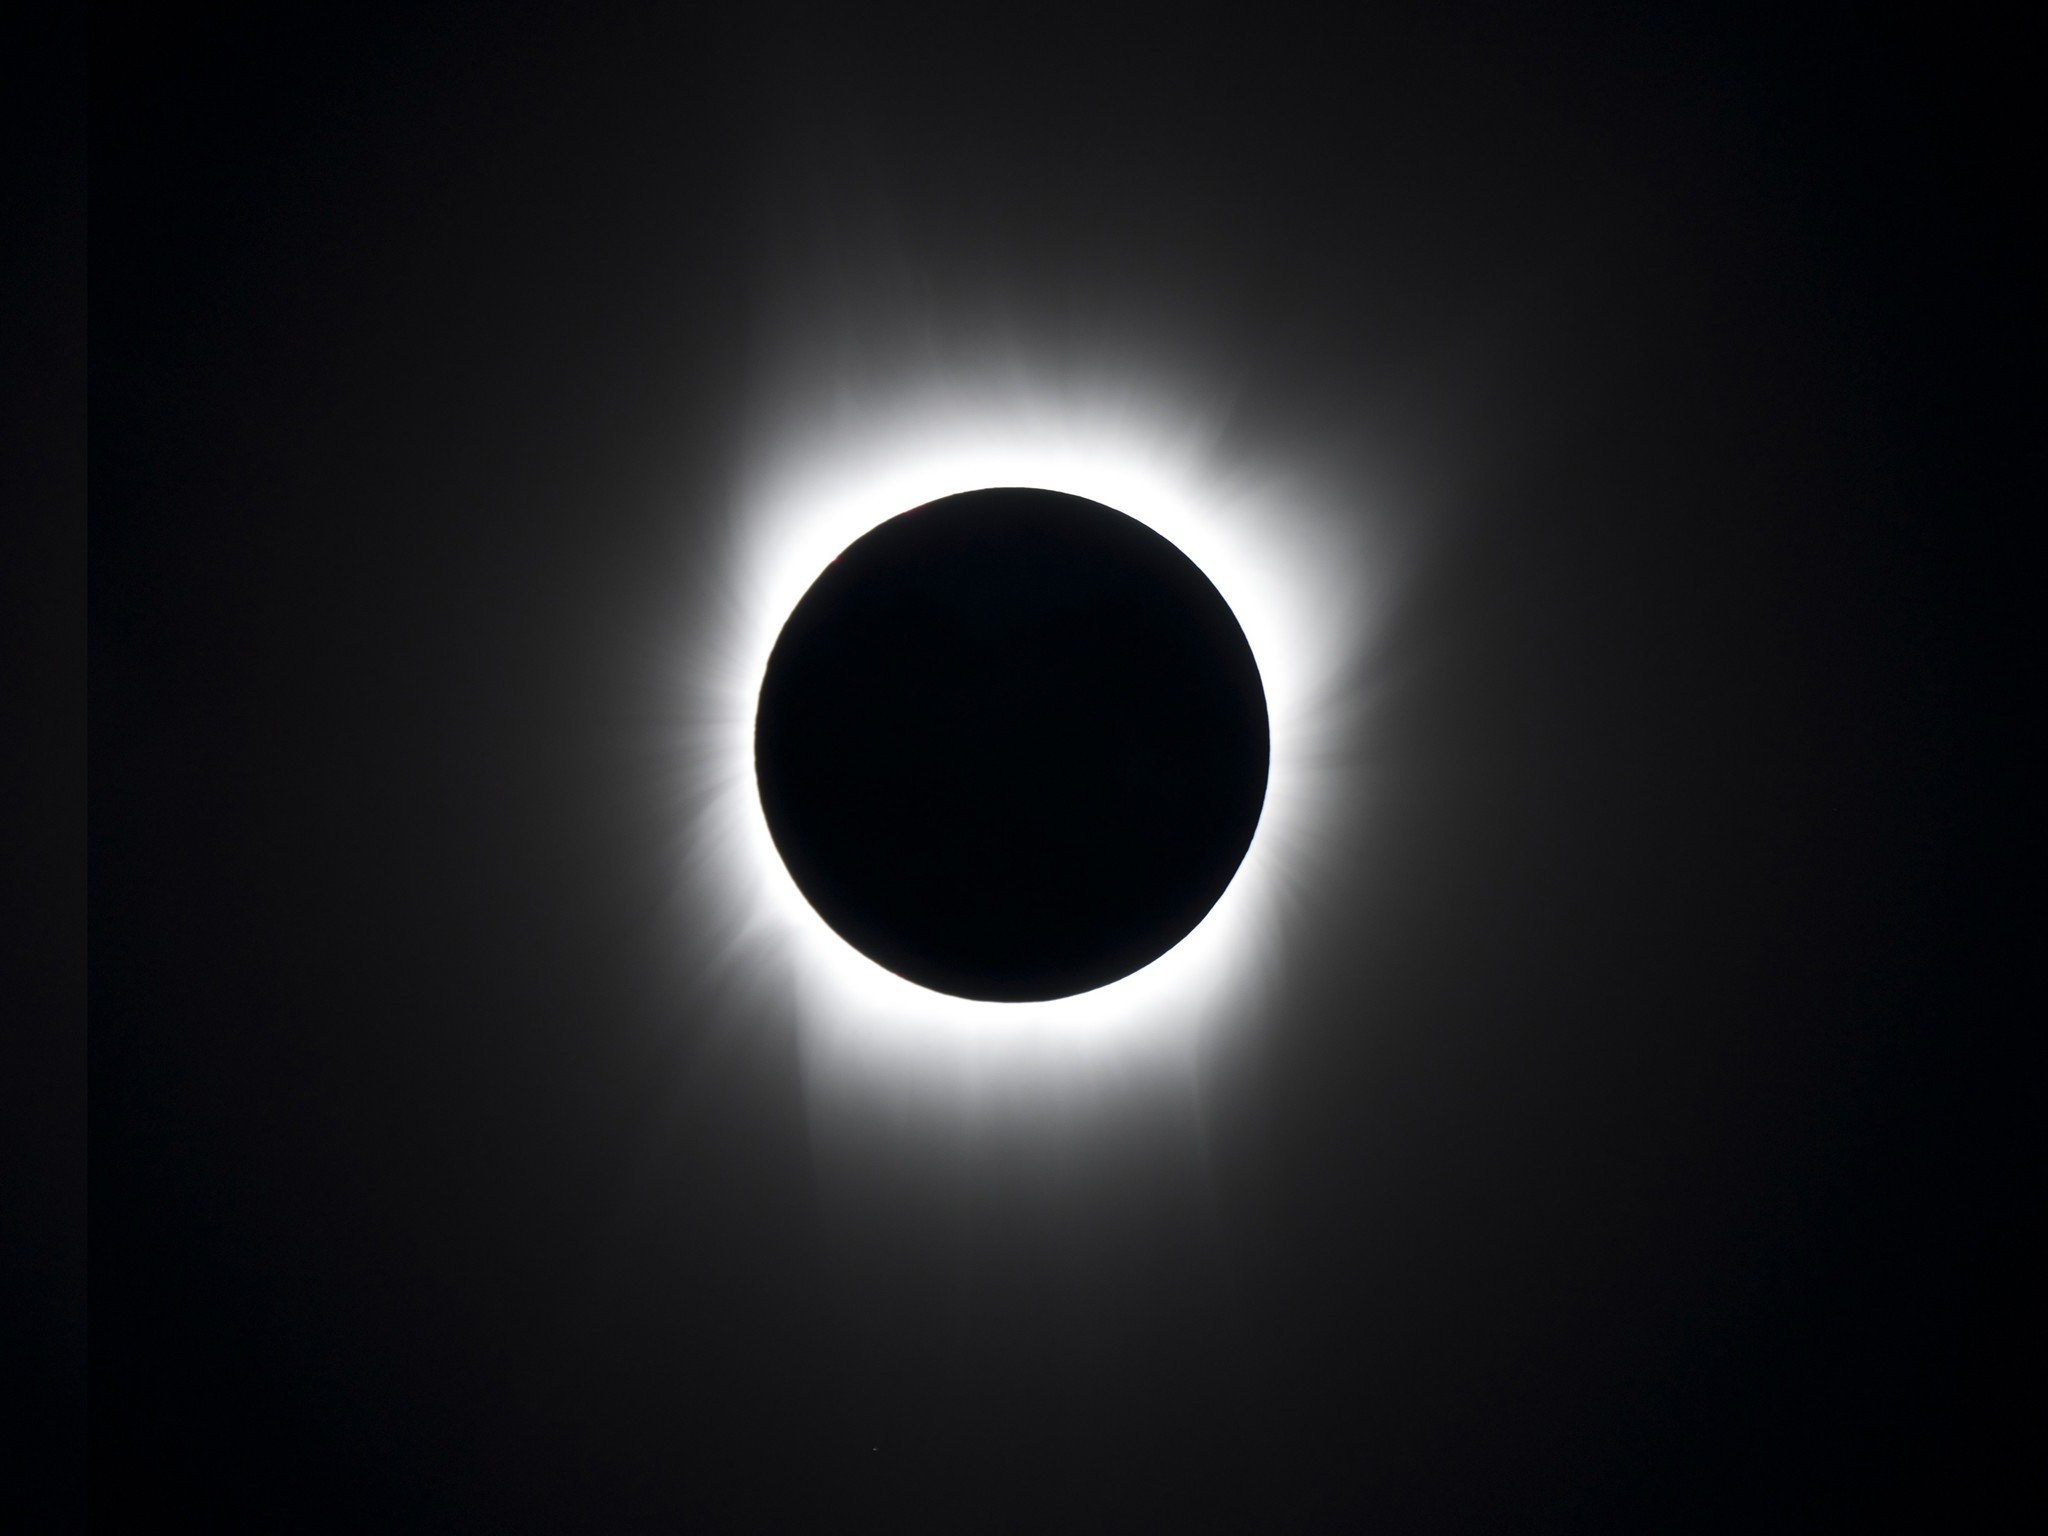 Blot Out The Sun With These Eclipse Wallpapers Android Central Images, Photos, Reviews